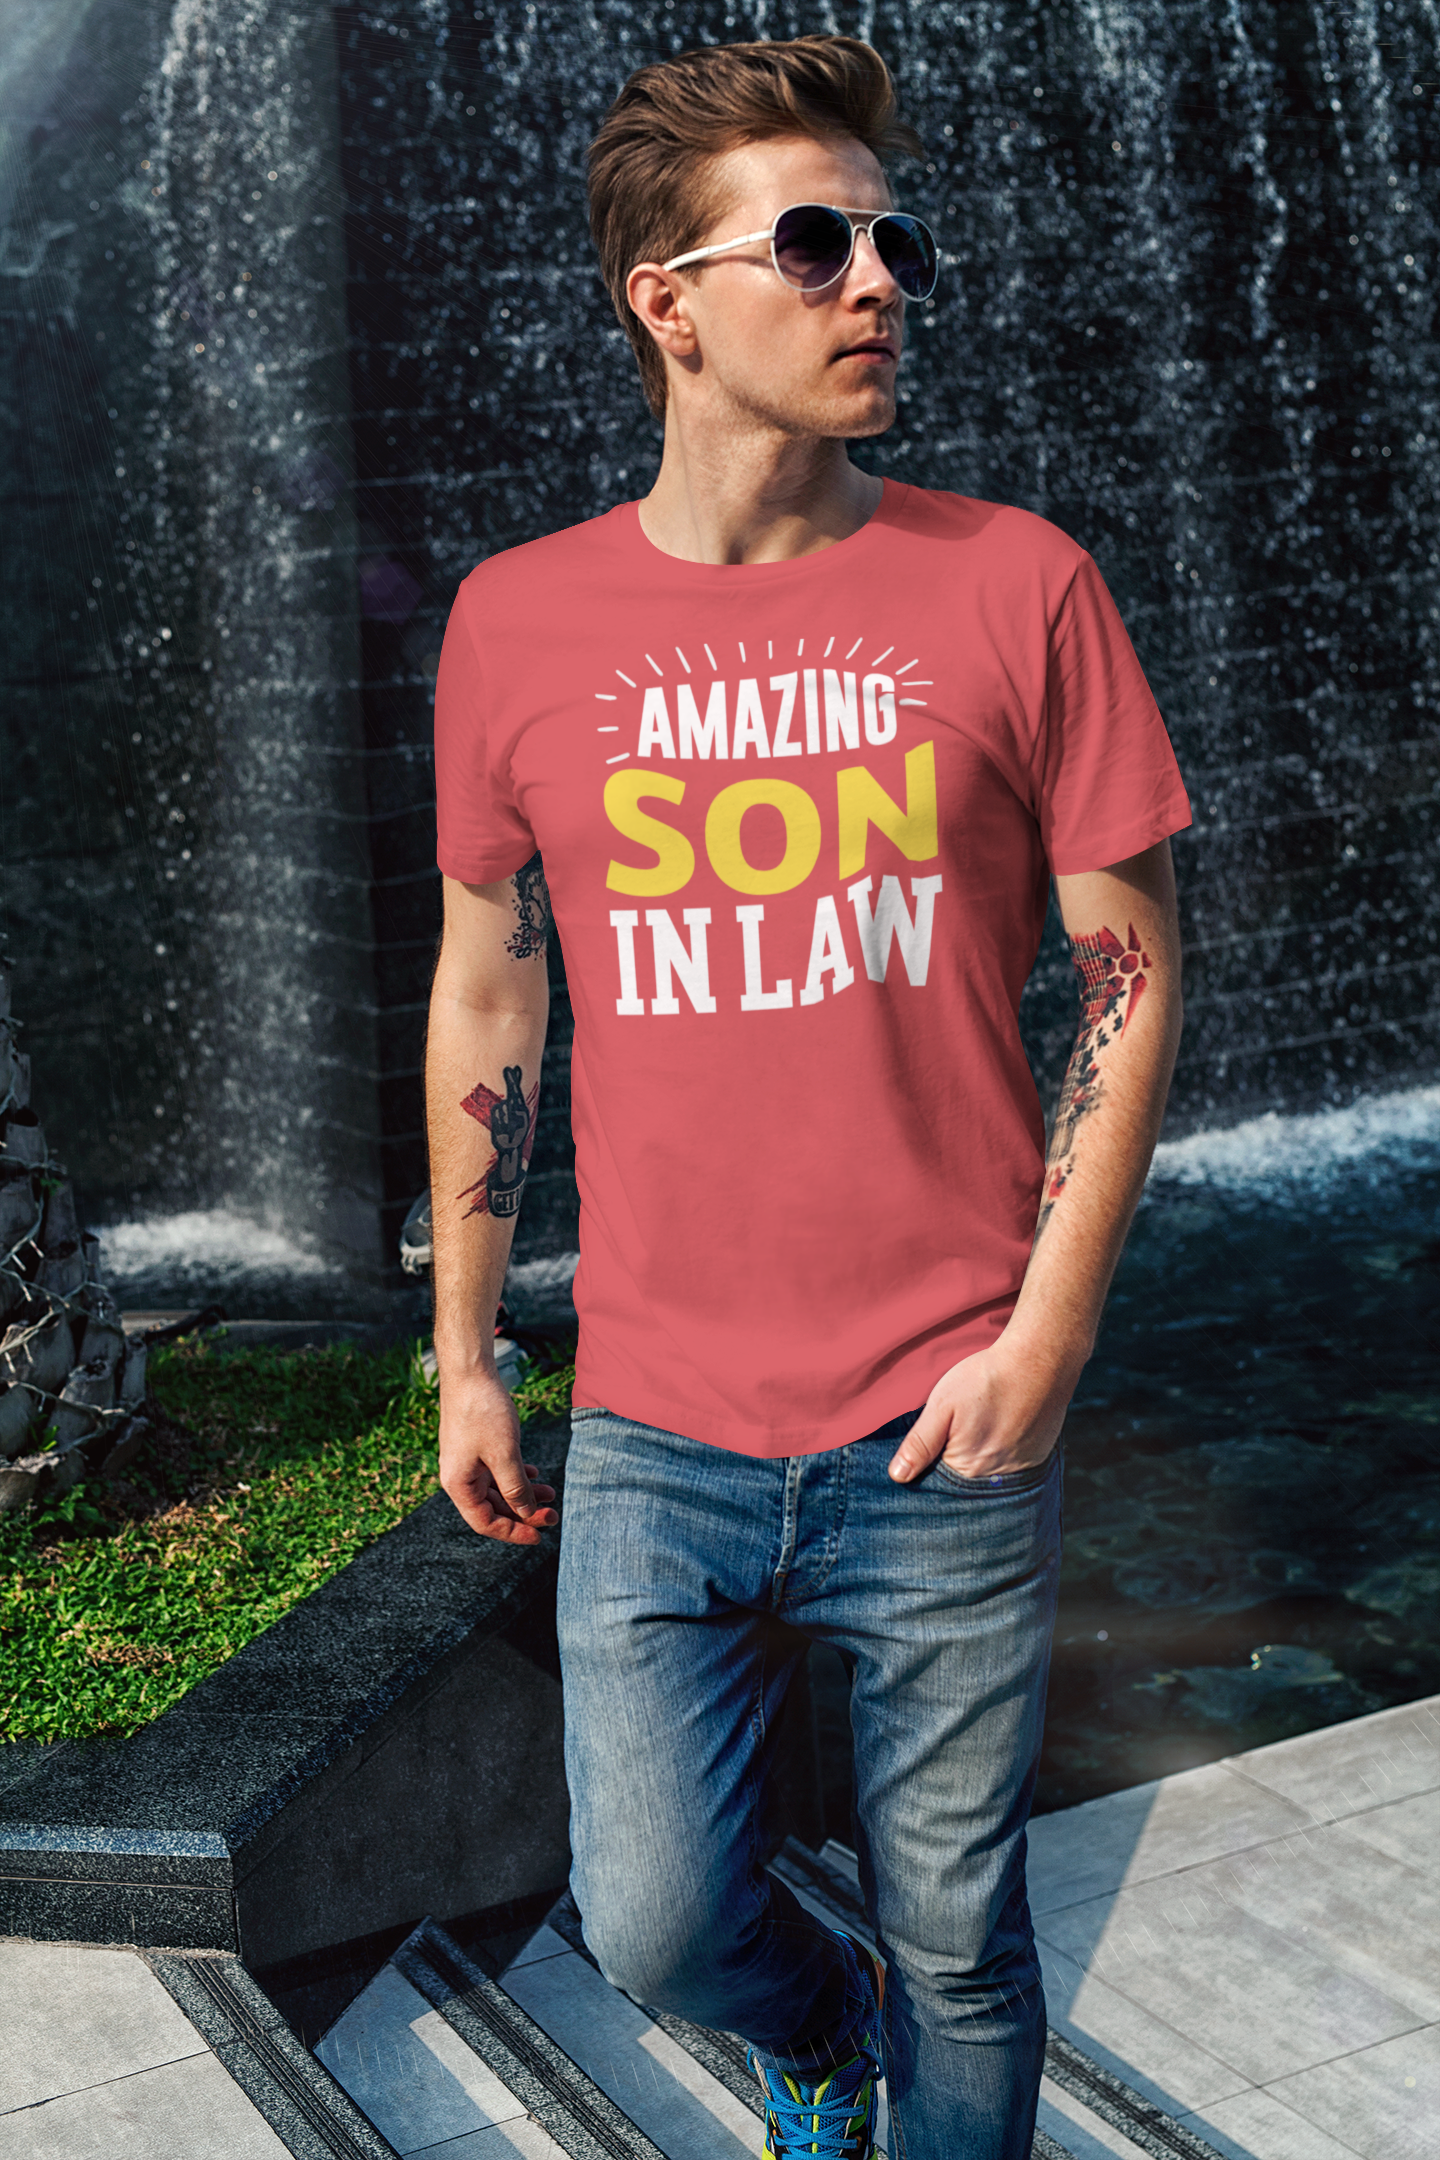 Amazing Son in Law, Family Shirts, Family Reunion Shirts, Trendy Shirts